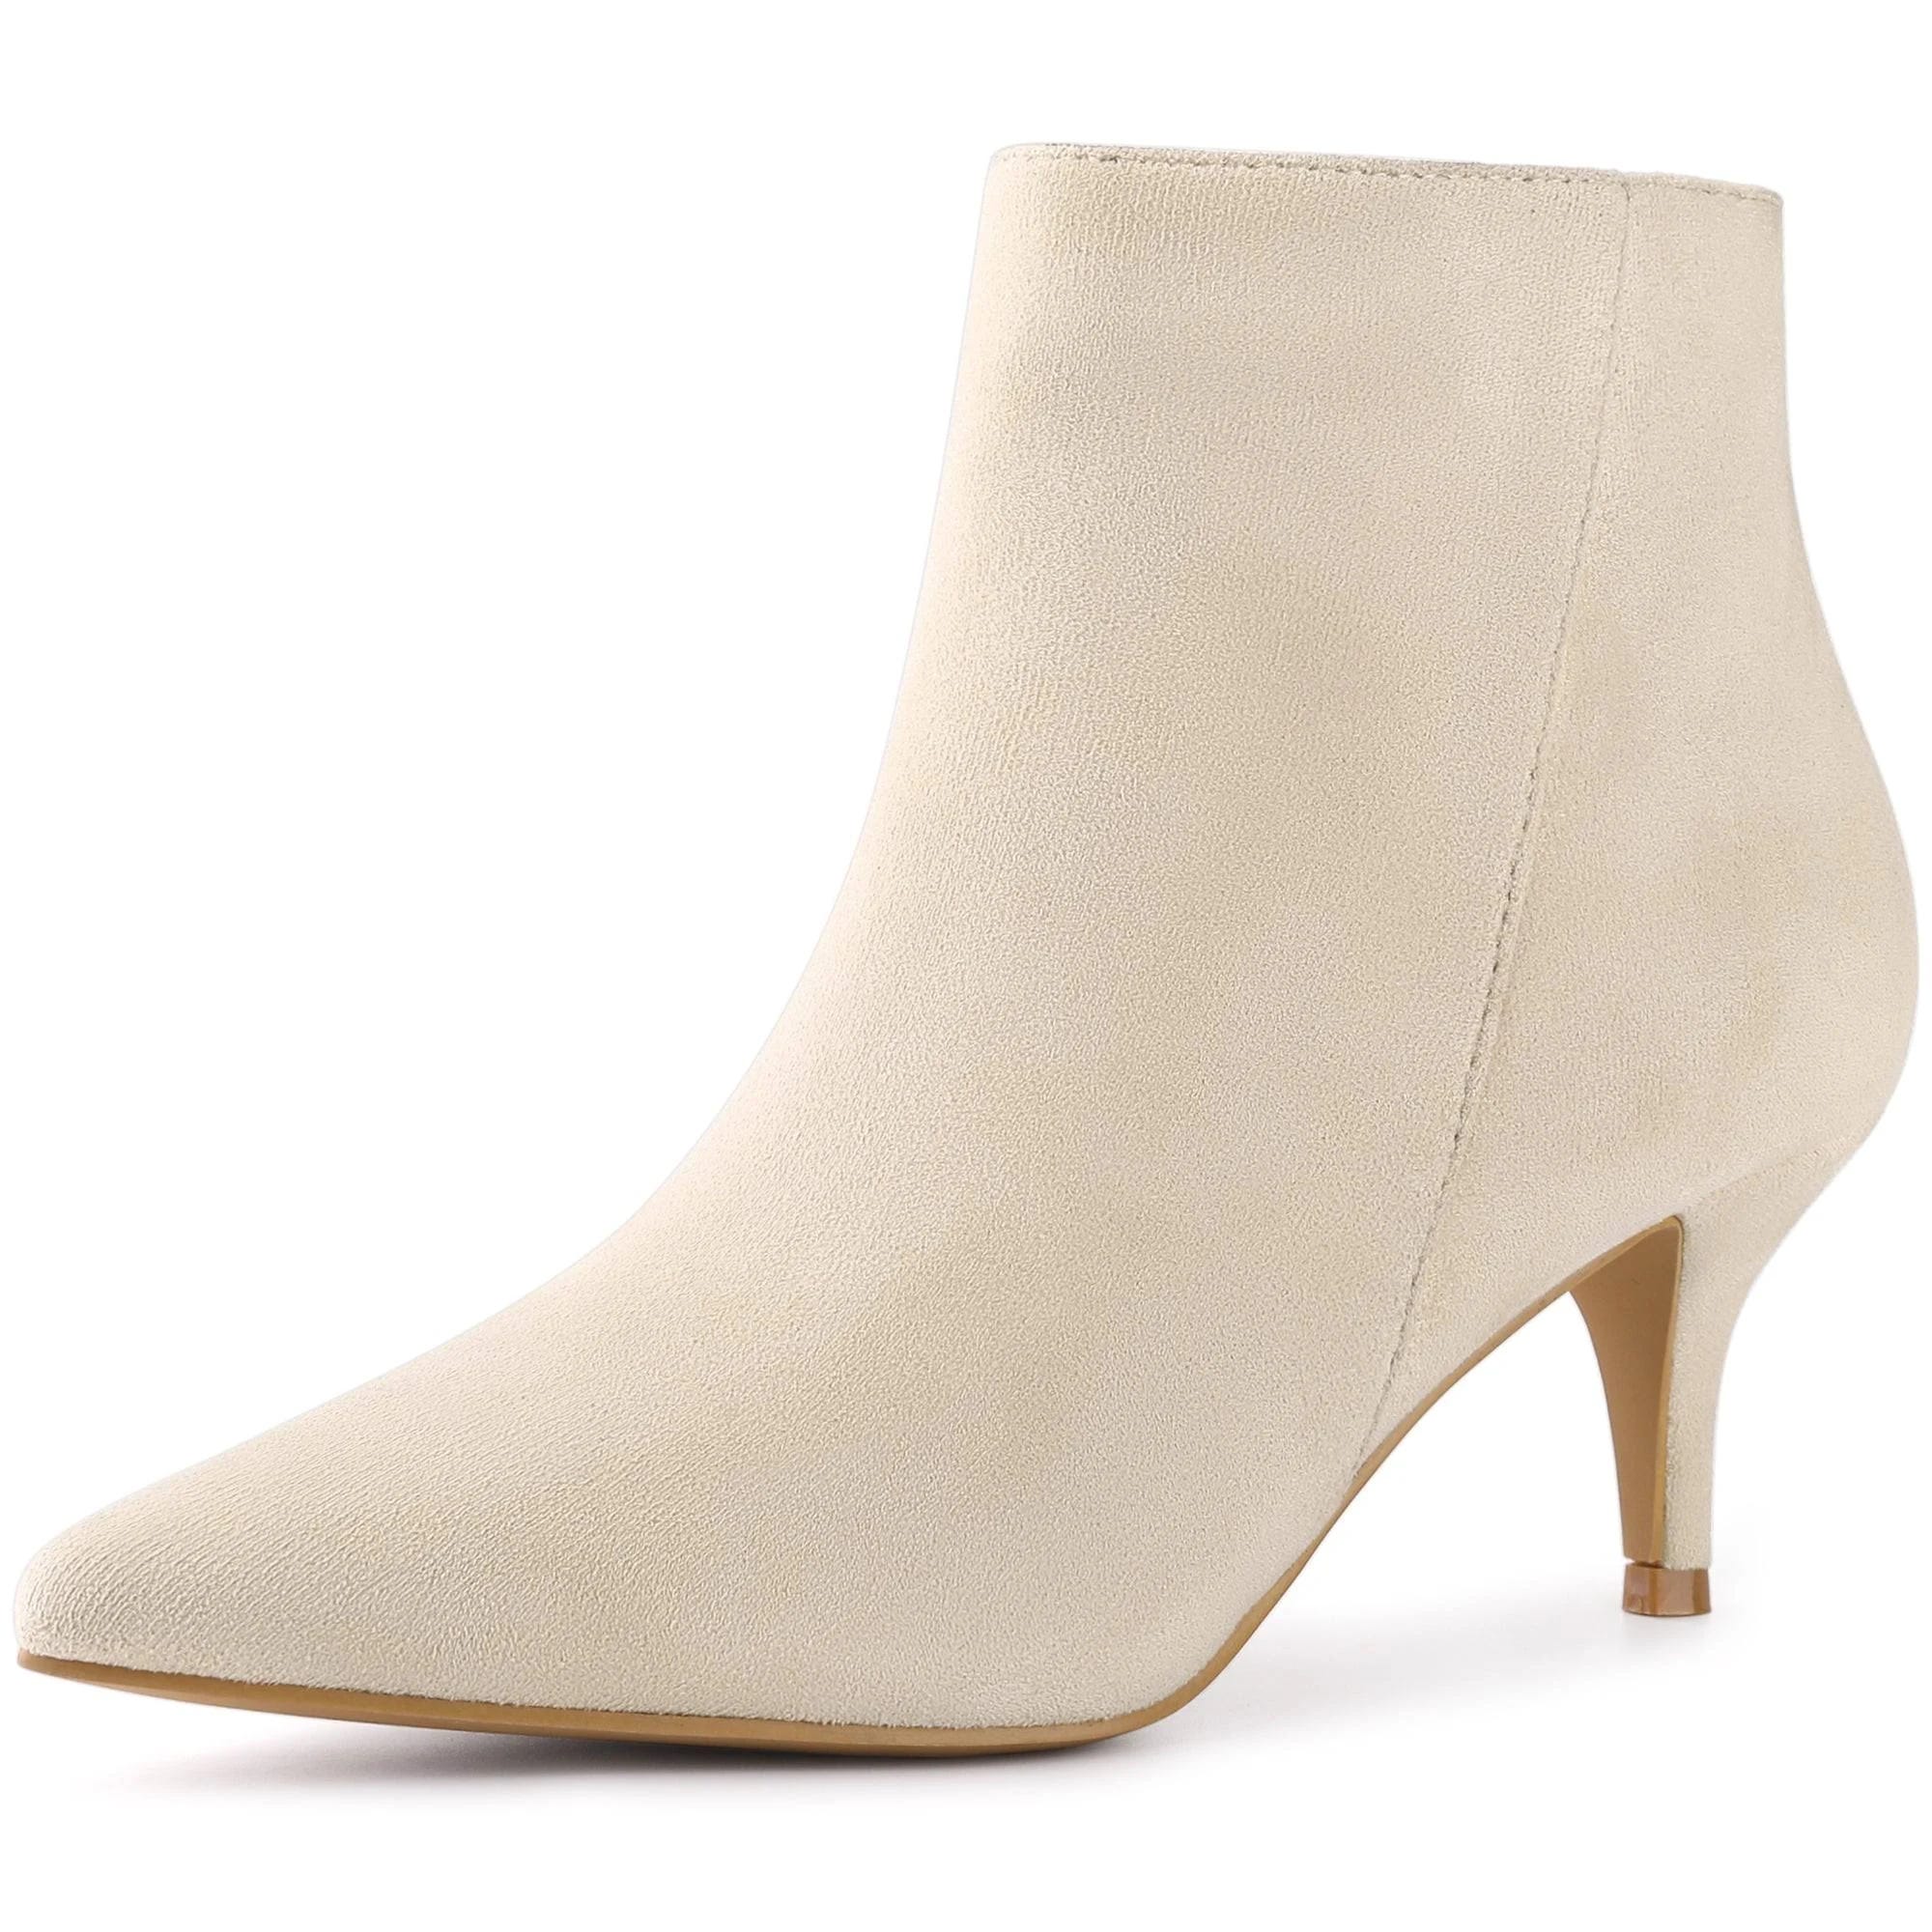 Faux Suede Pointed Toe Ankle Booties for Fall/Winter | Image